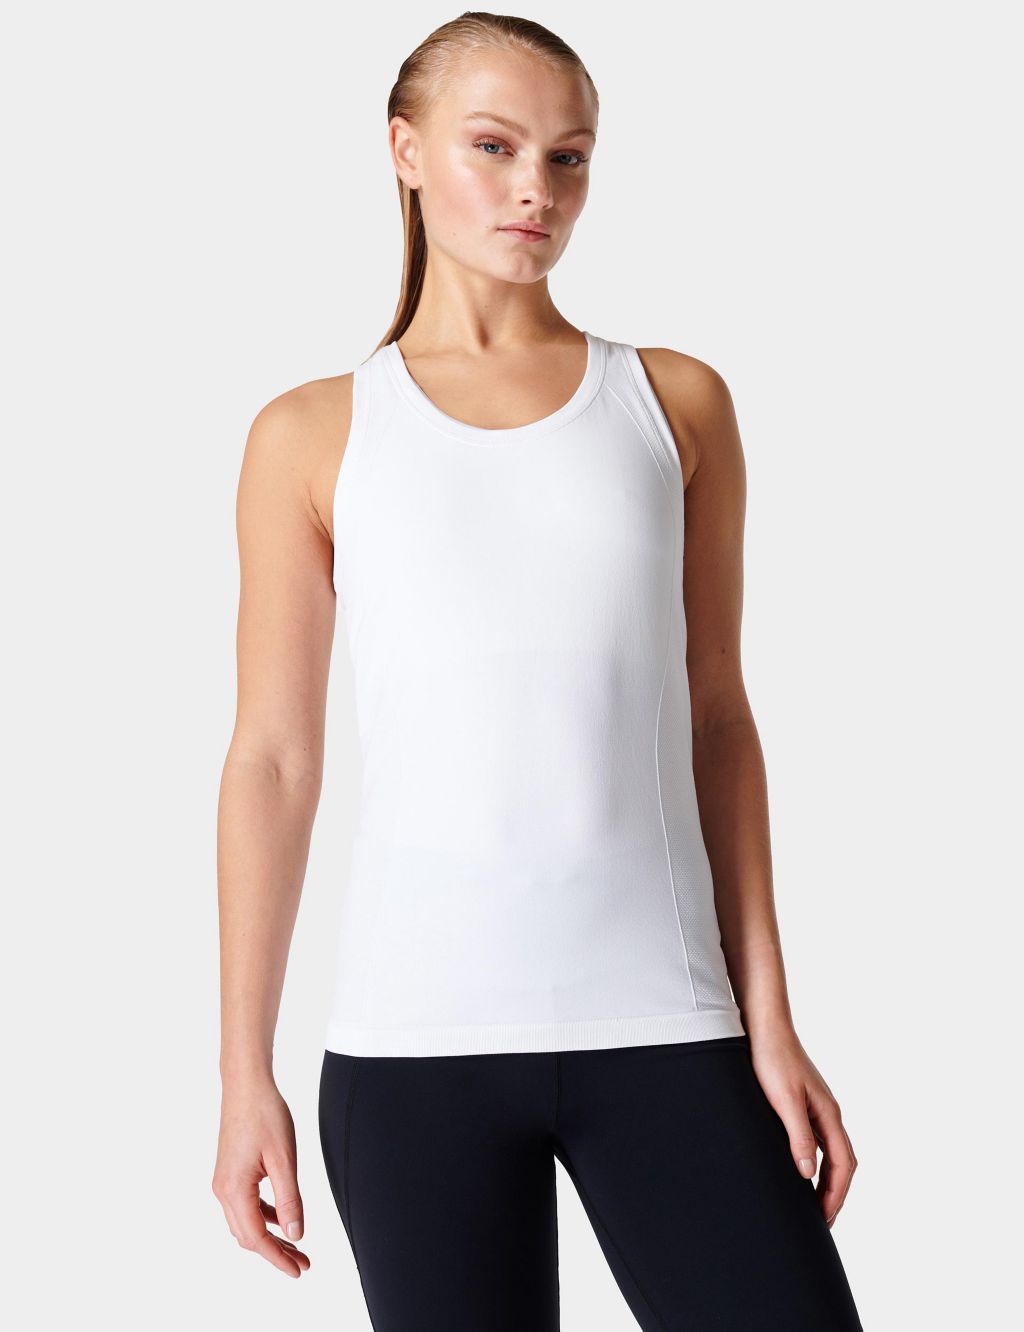 Athlete Seamless Fitted Vest Top image 2